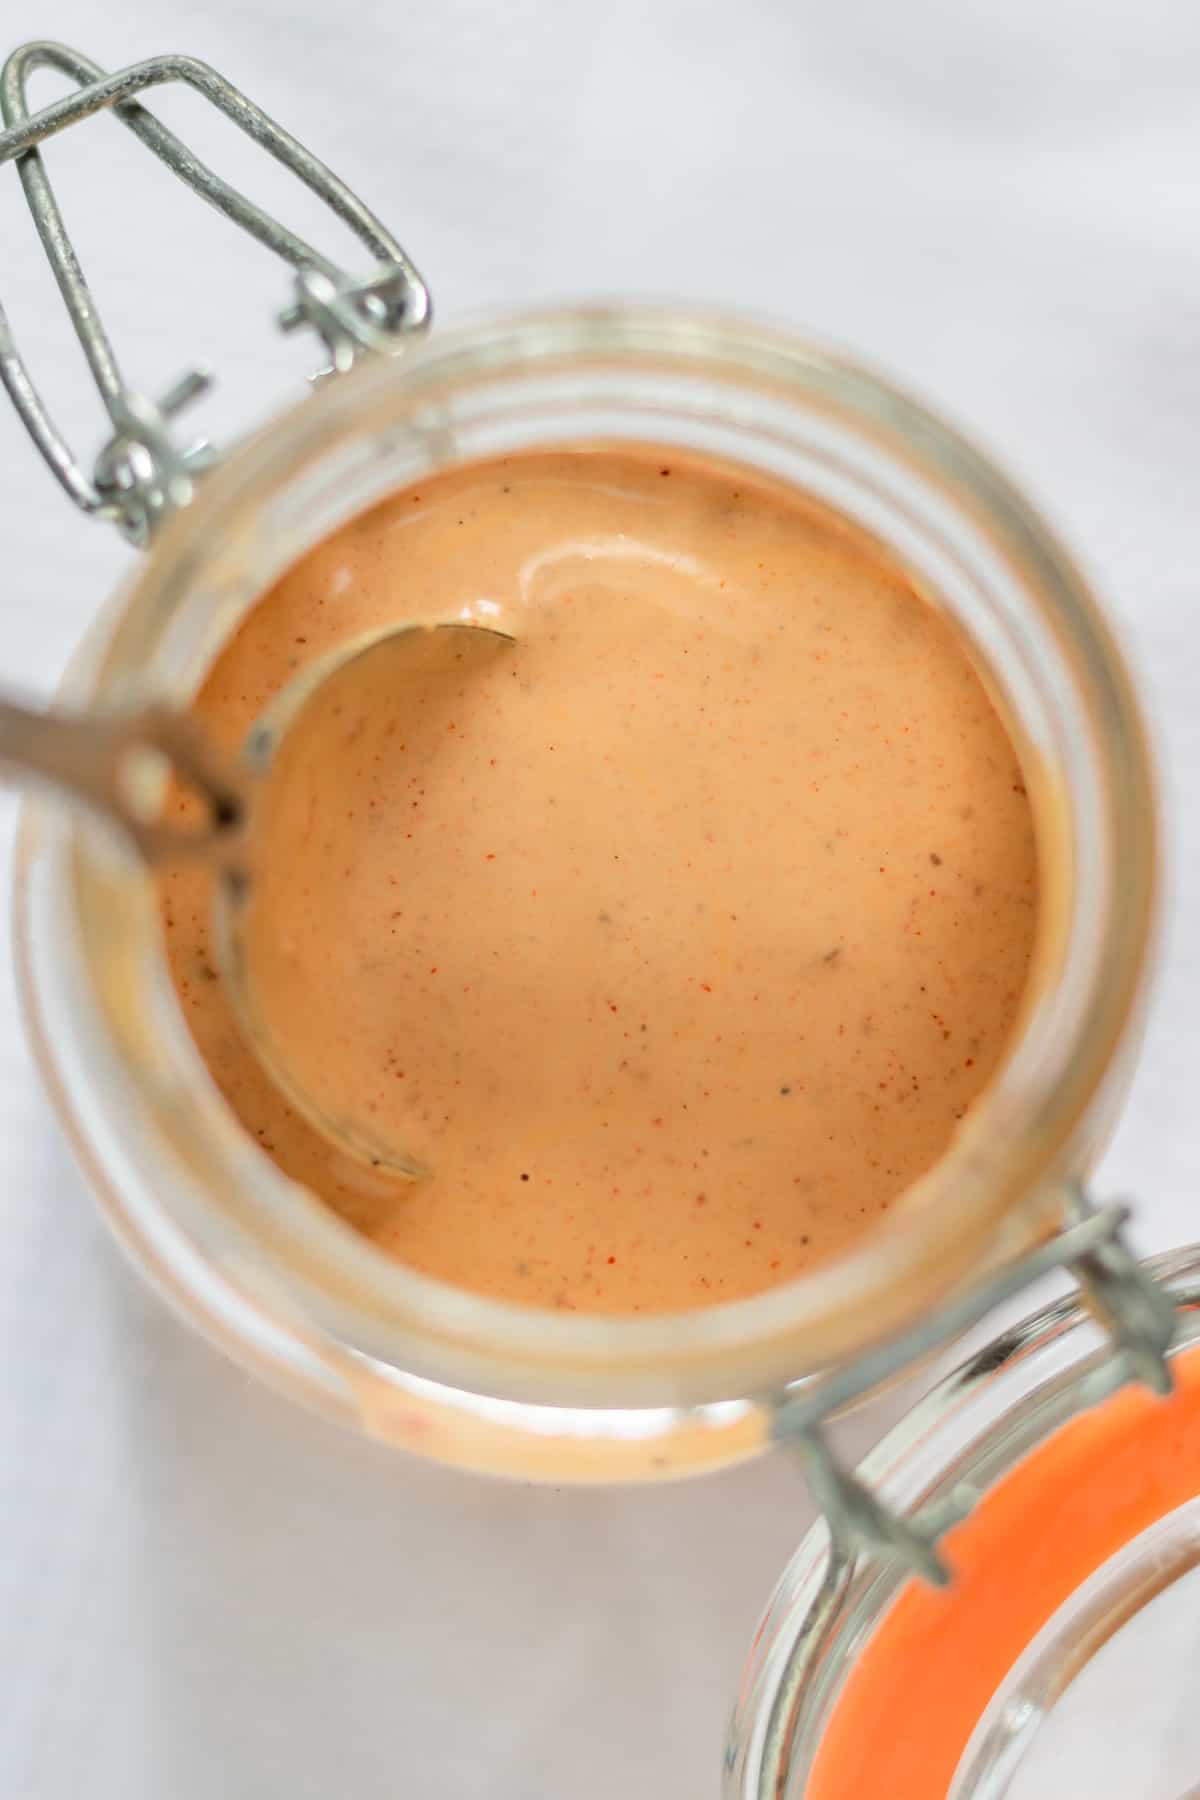 Looking down at a jar of sauce with a spoon in it.